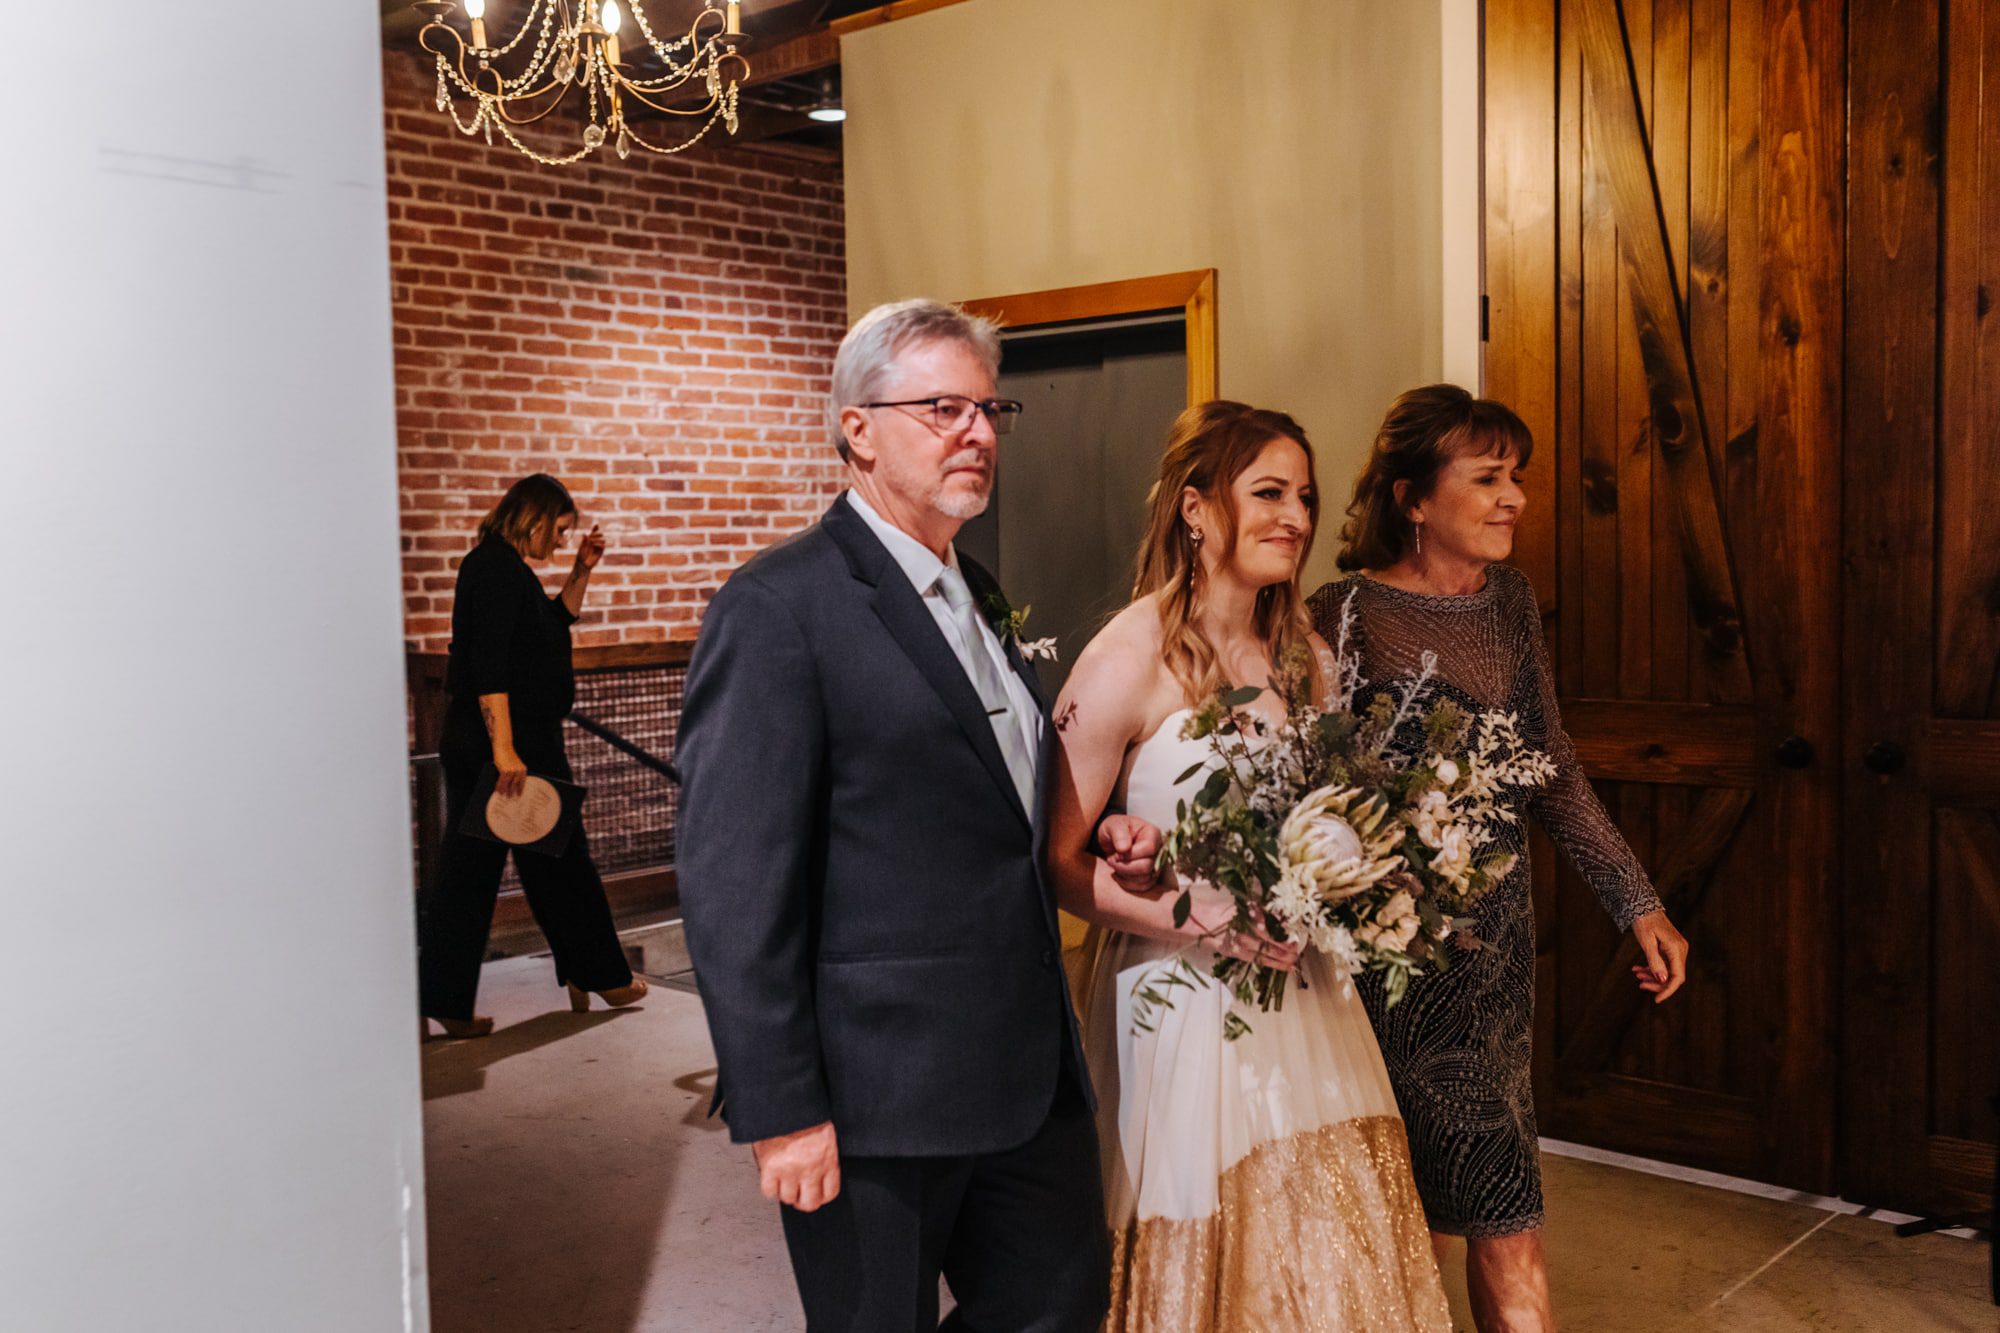 st vrain wedding venue, st vrain wedding, longmont wedding venue, industrial wedding venue, colorado wedding photographer, indoor wedding ceremony, bride walking down aisle with both parents, bride with mom and dad